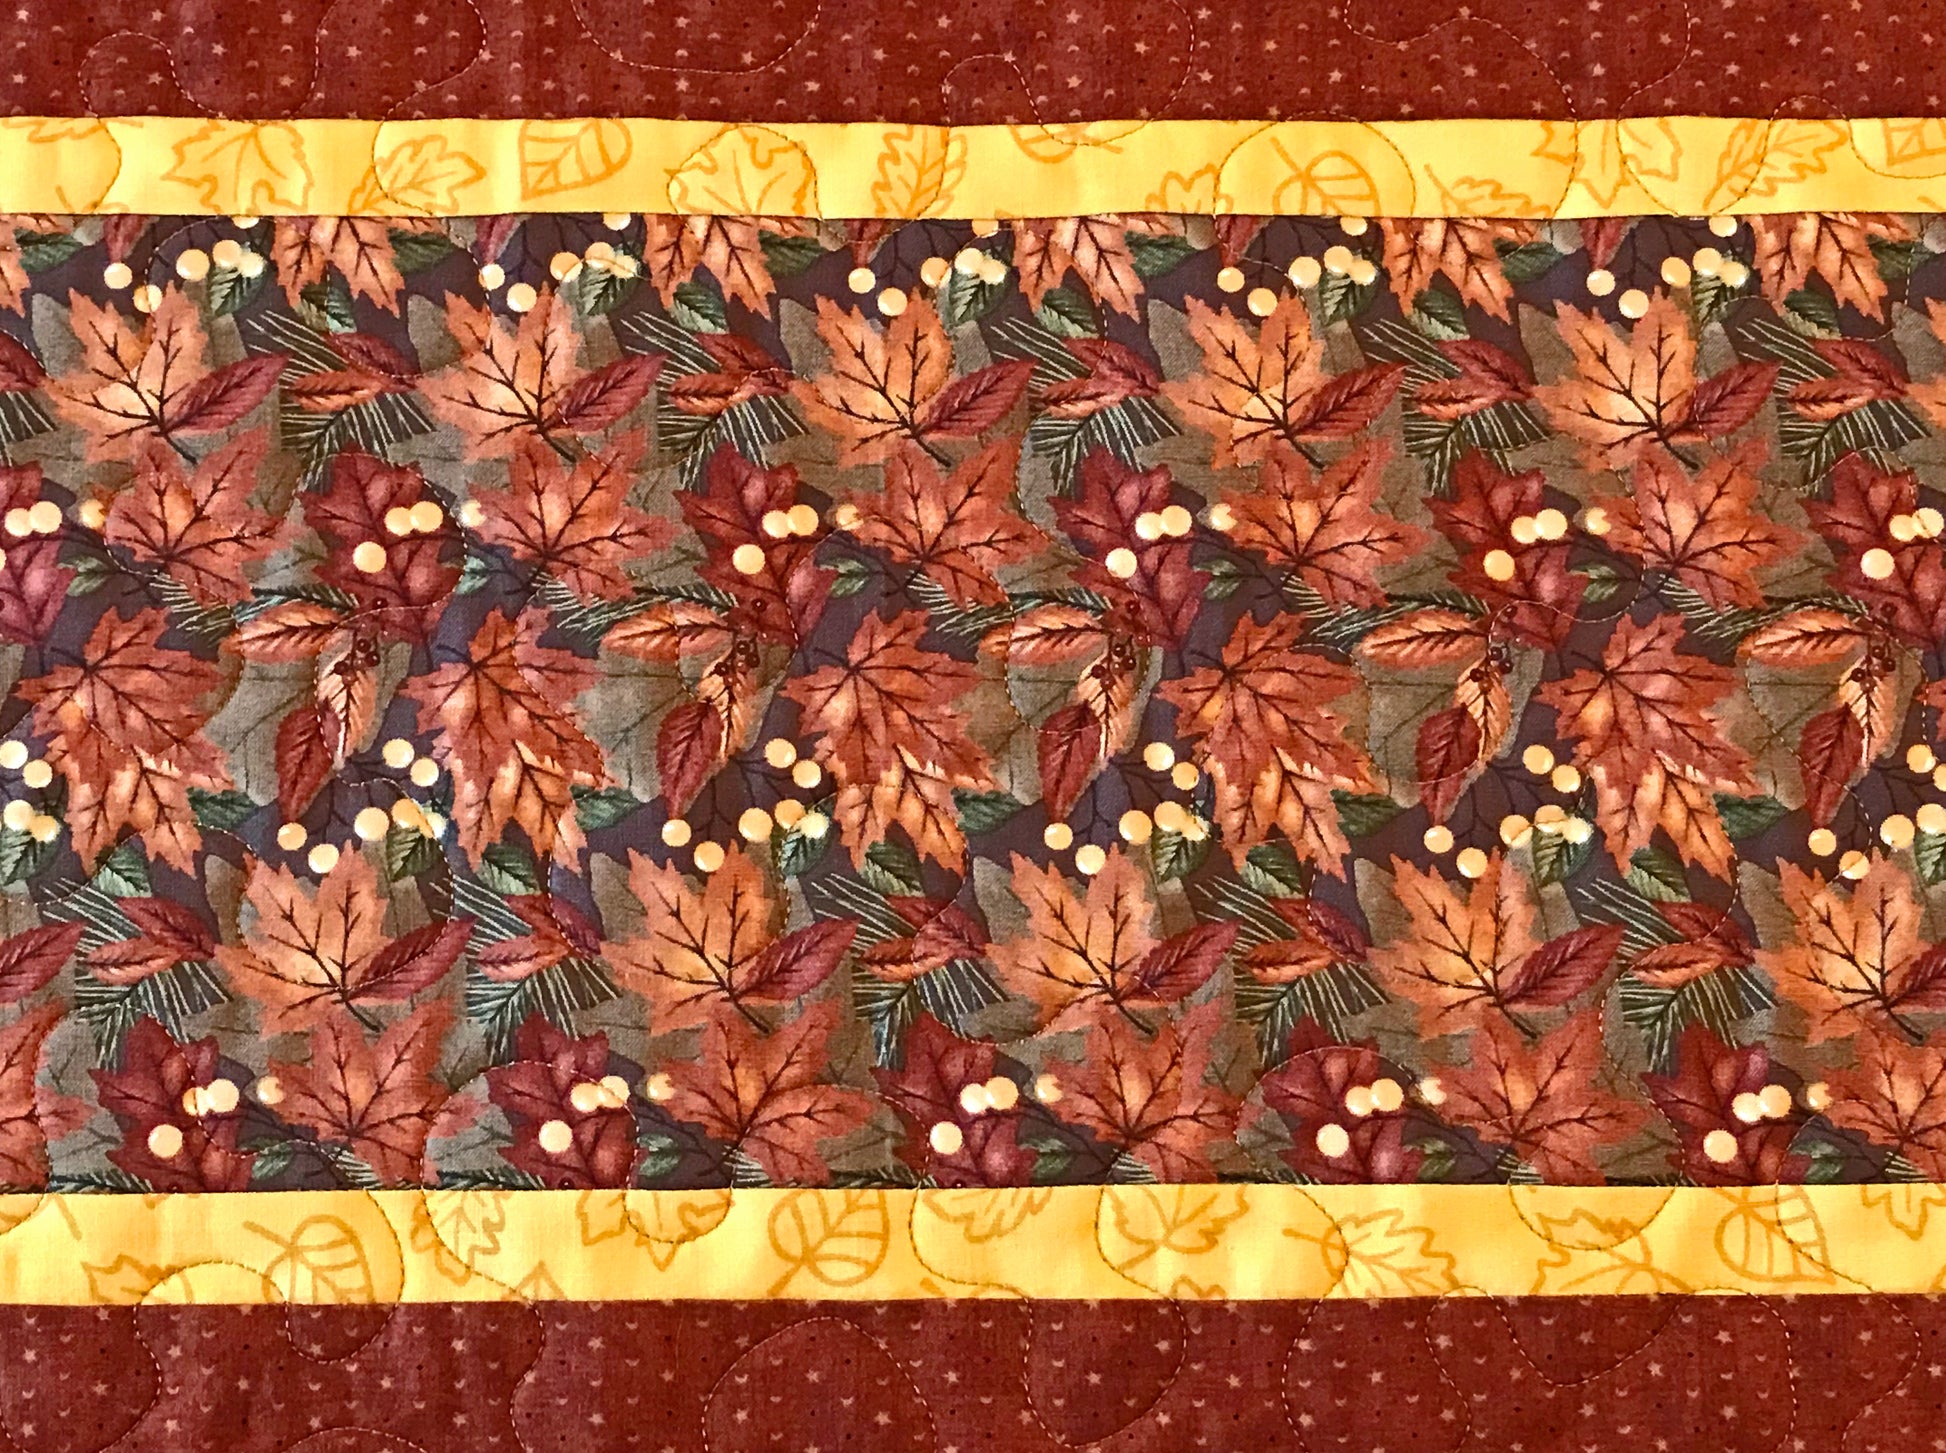 Fall or Autumn Leaves Table Runner - Handmade Quilts, Digital Patterns, and Home Décor items online - Cuddle Cat Quiltworks